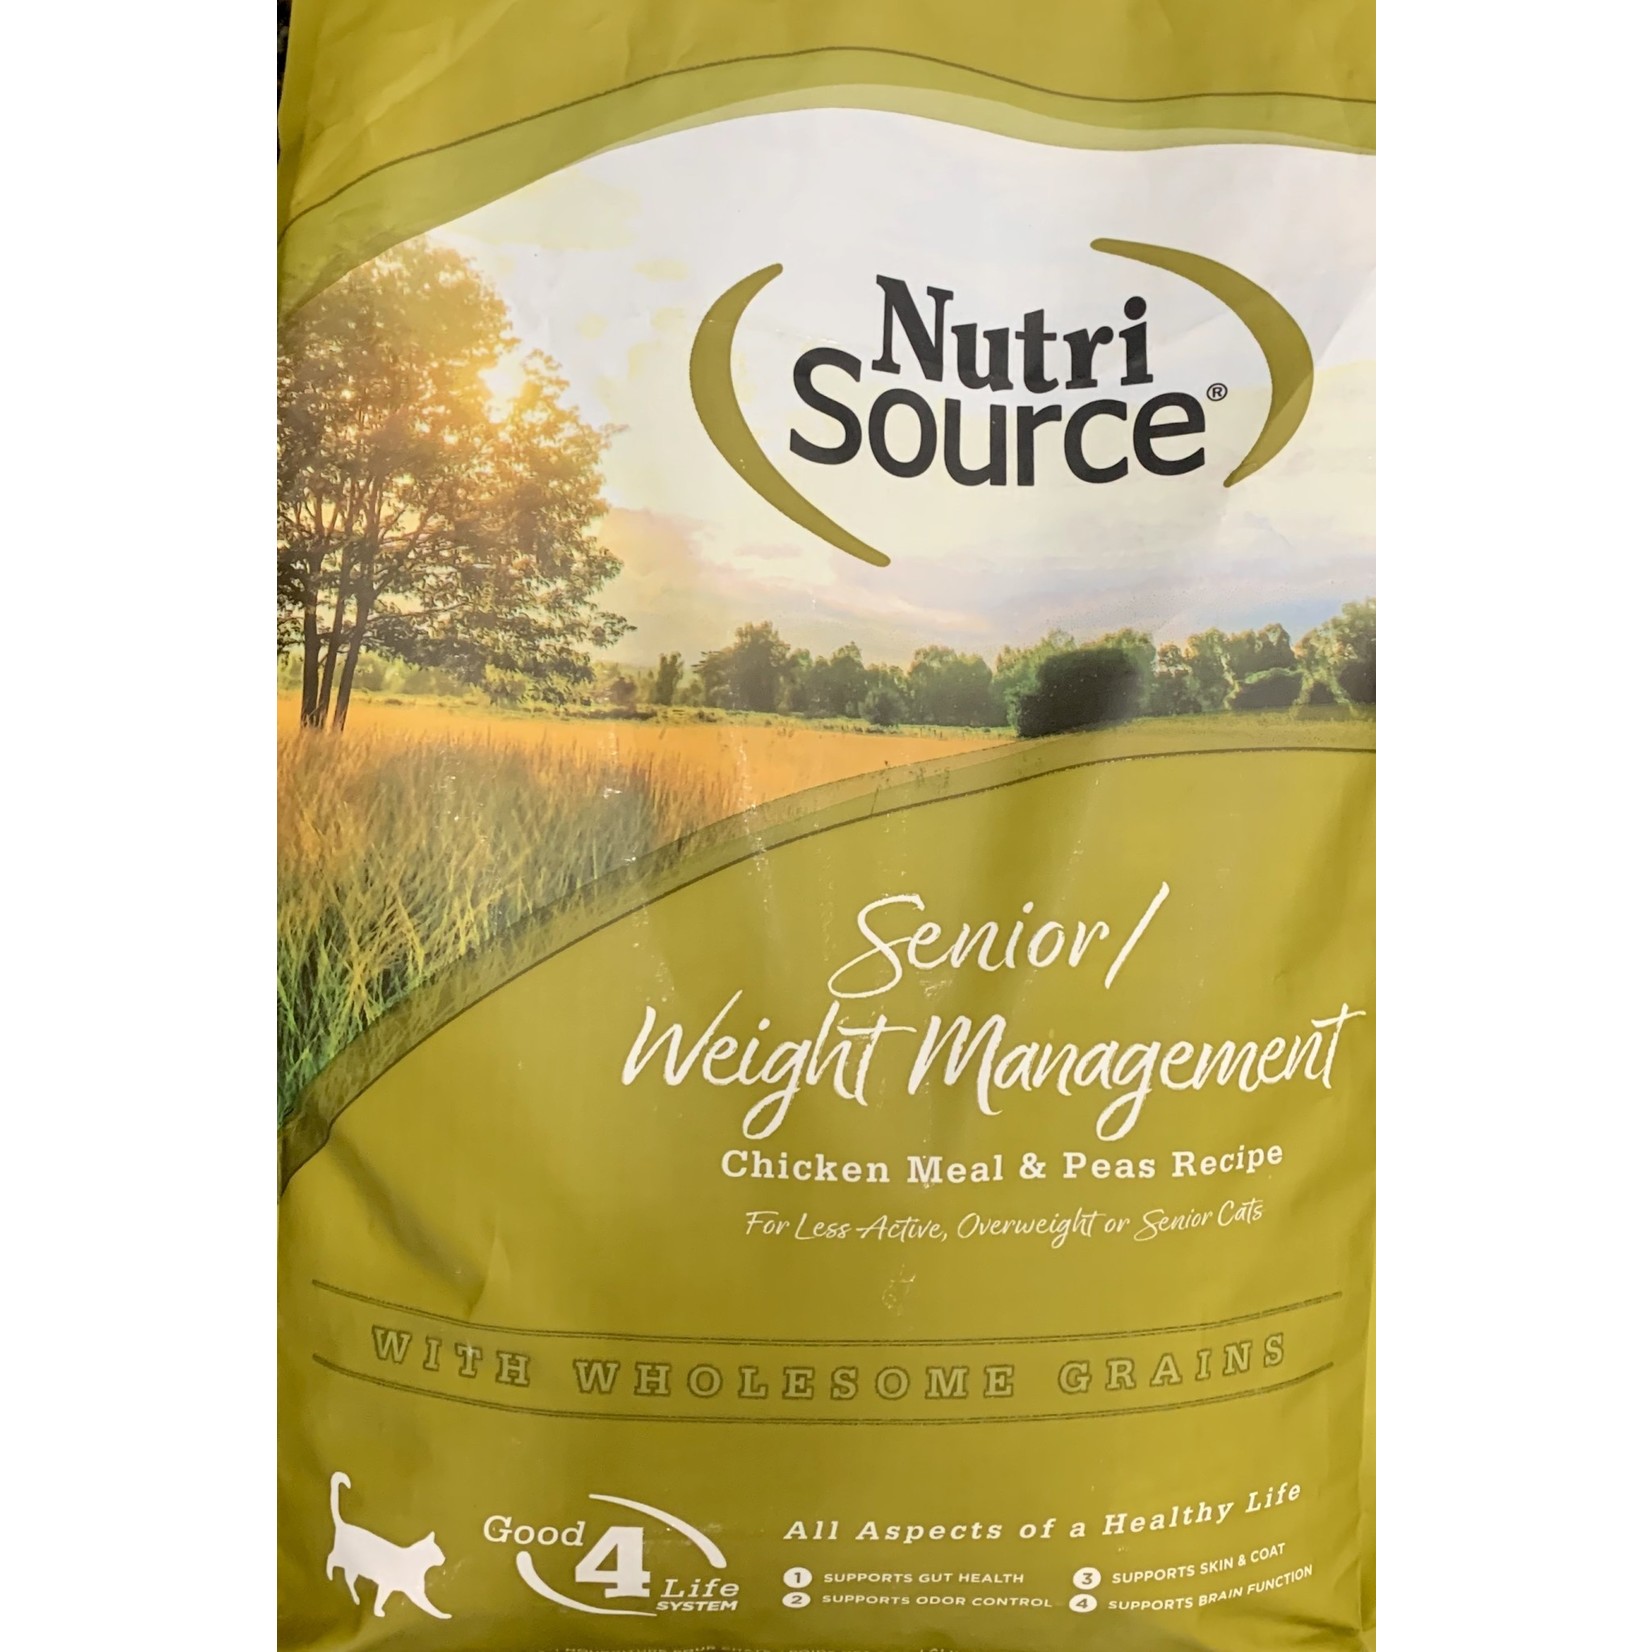 NUTRISOURCE. Senior Weight Management Chicken Meal & Peas Recipe. Cat Food 6.6LB